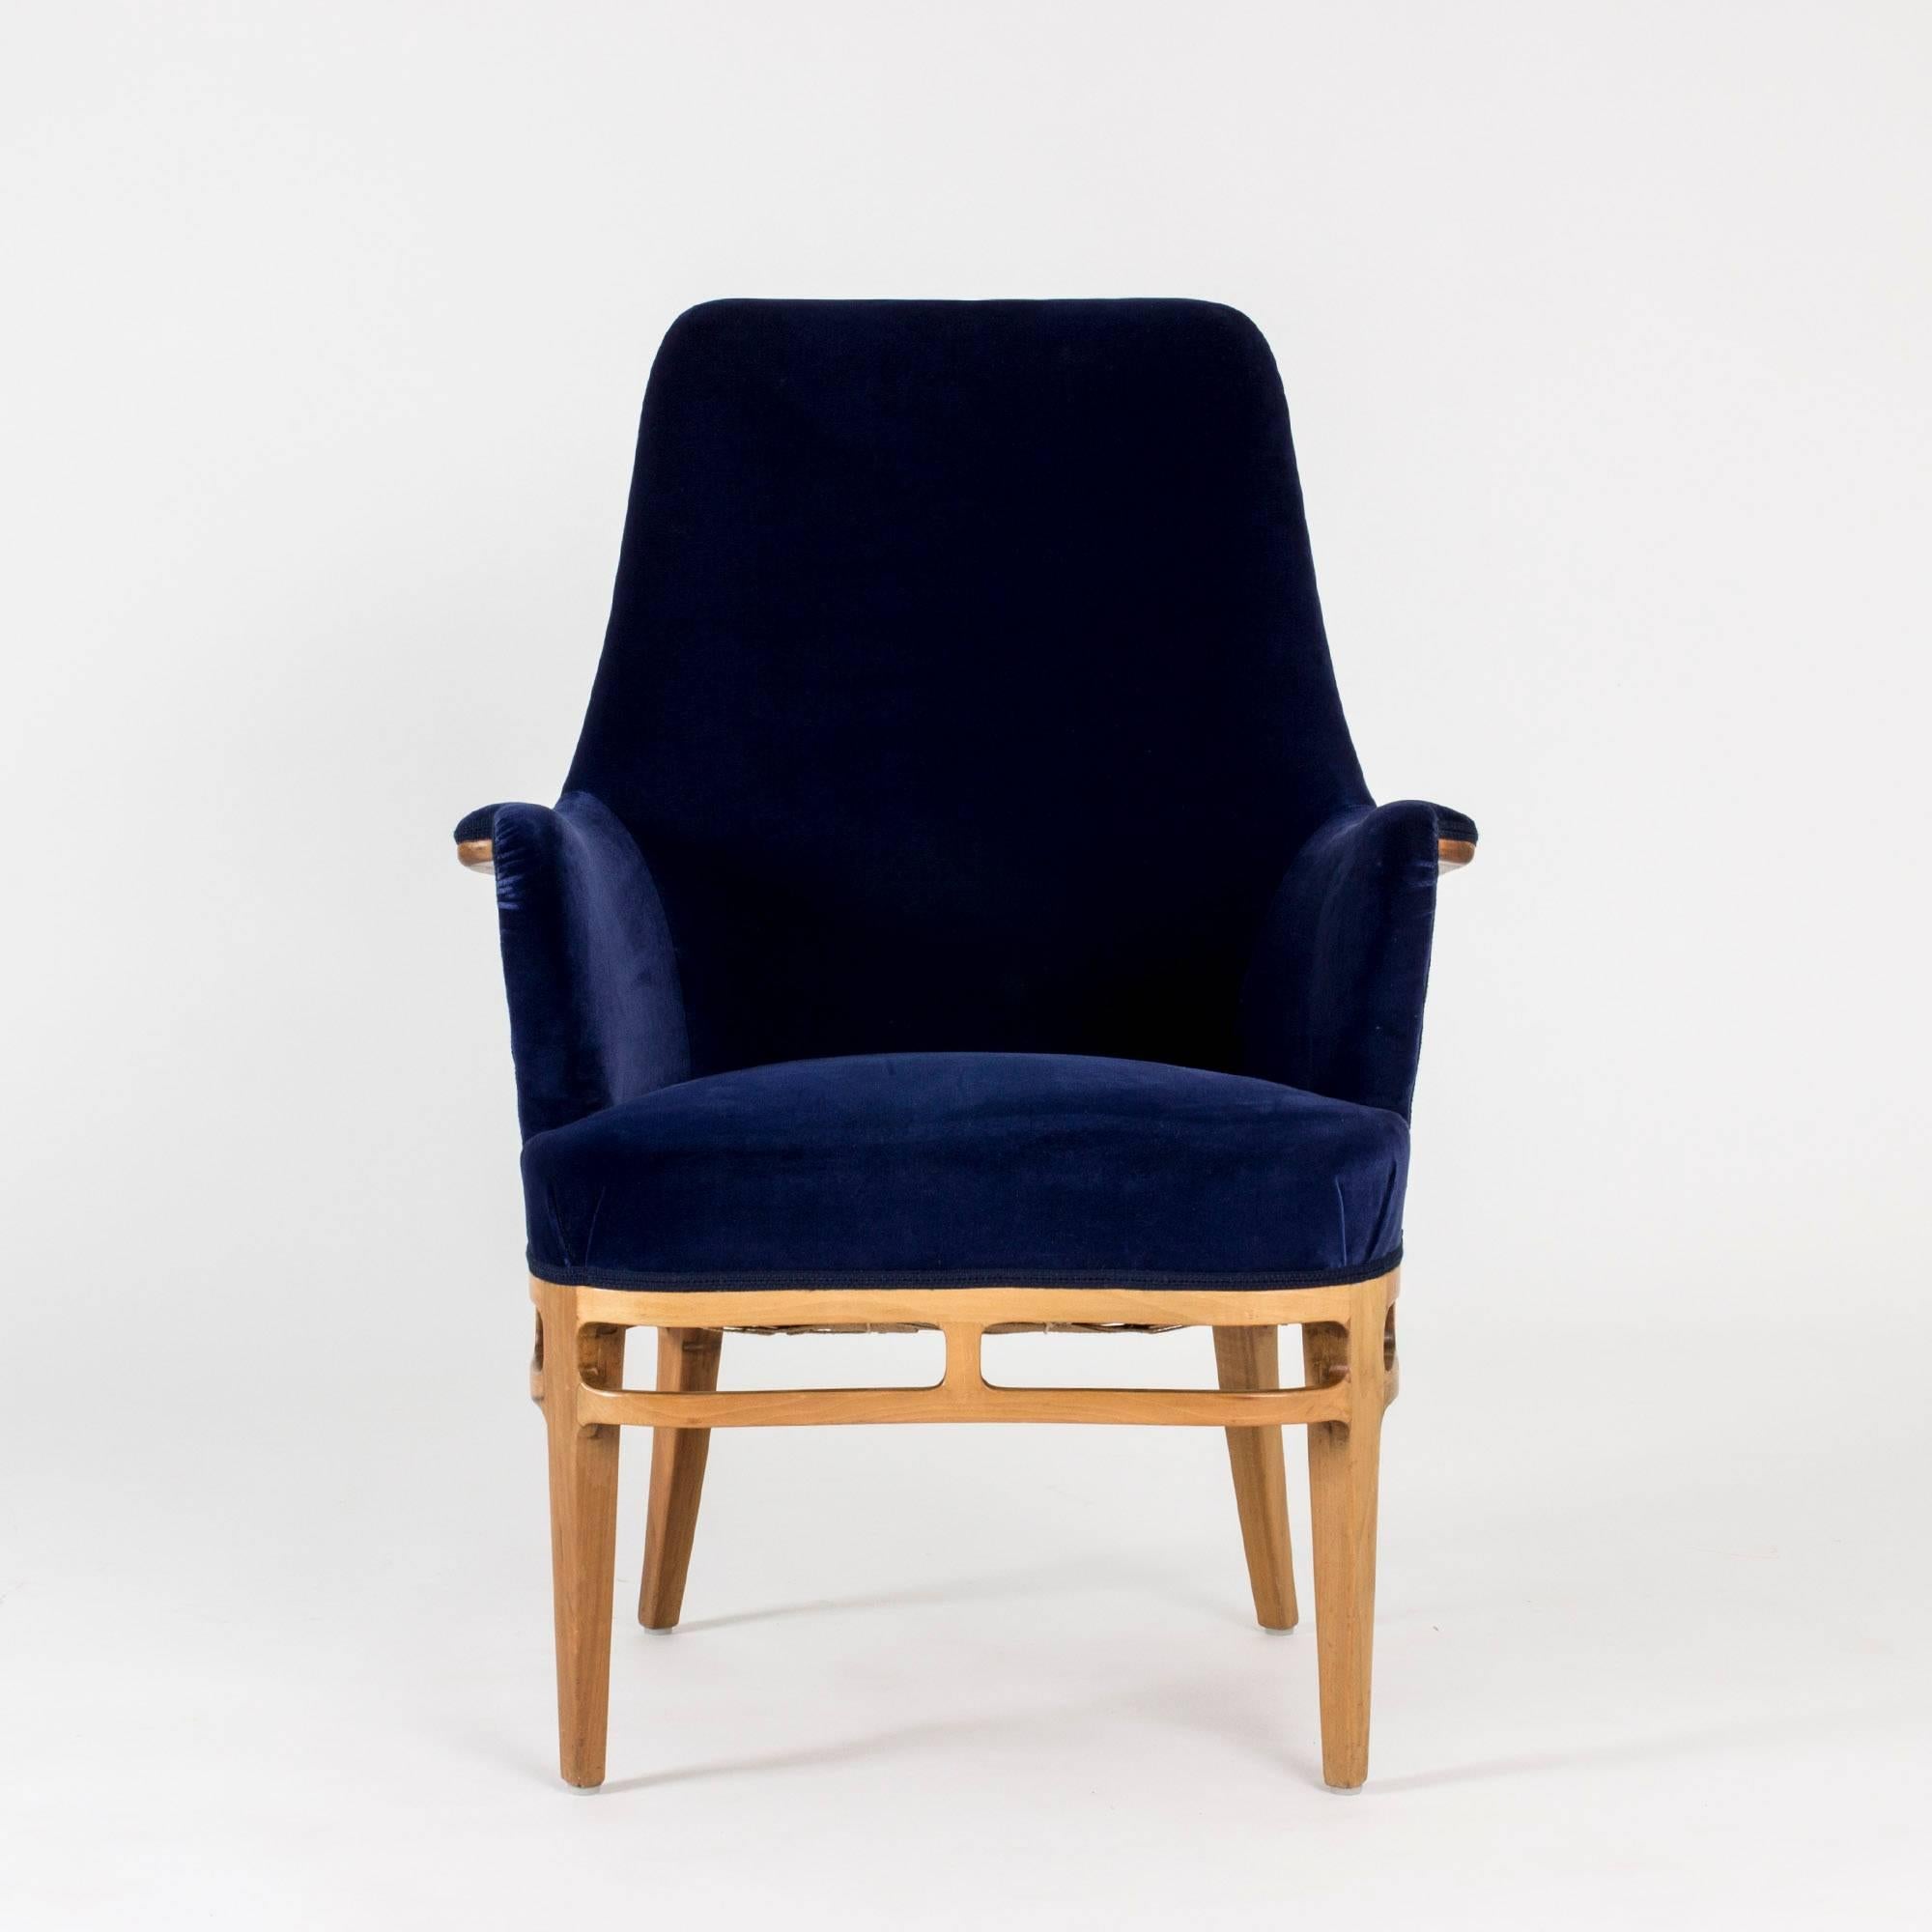 Exquisite lounge chair by Carl-Axel Acking, made in elmwood and upholstered with midnight blue velvet. Beautiful carved decor around the base of the seat and lines of wood following the curves of the armrests and back.